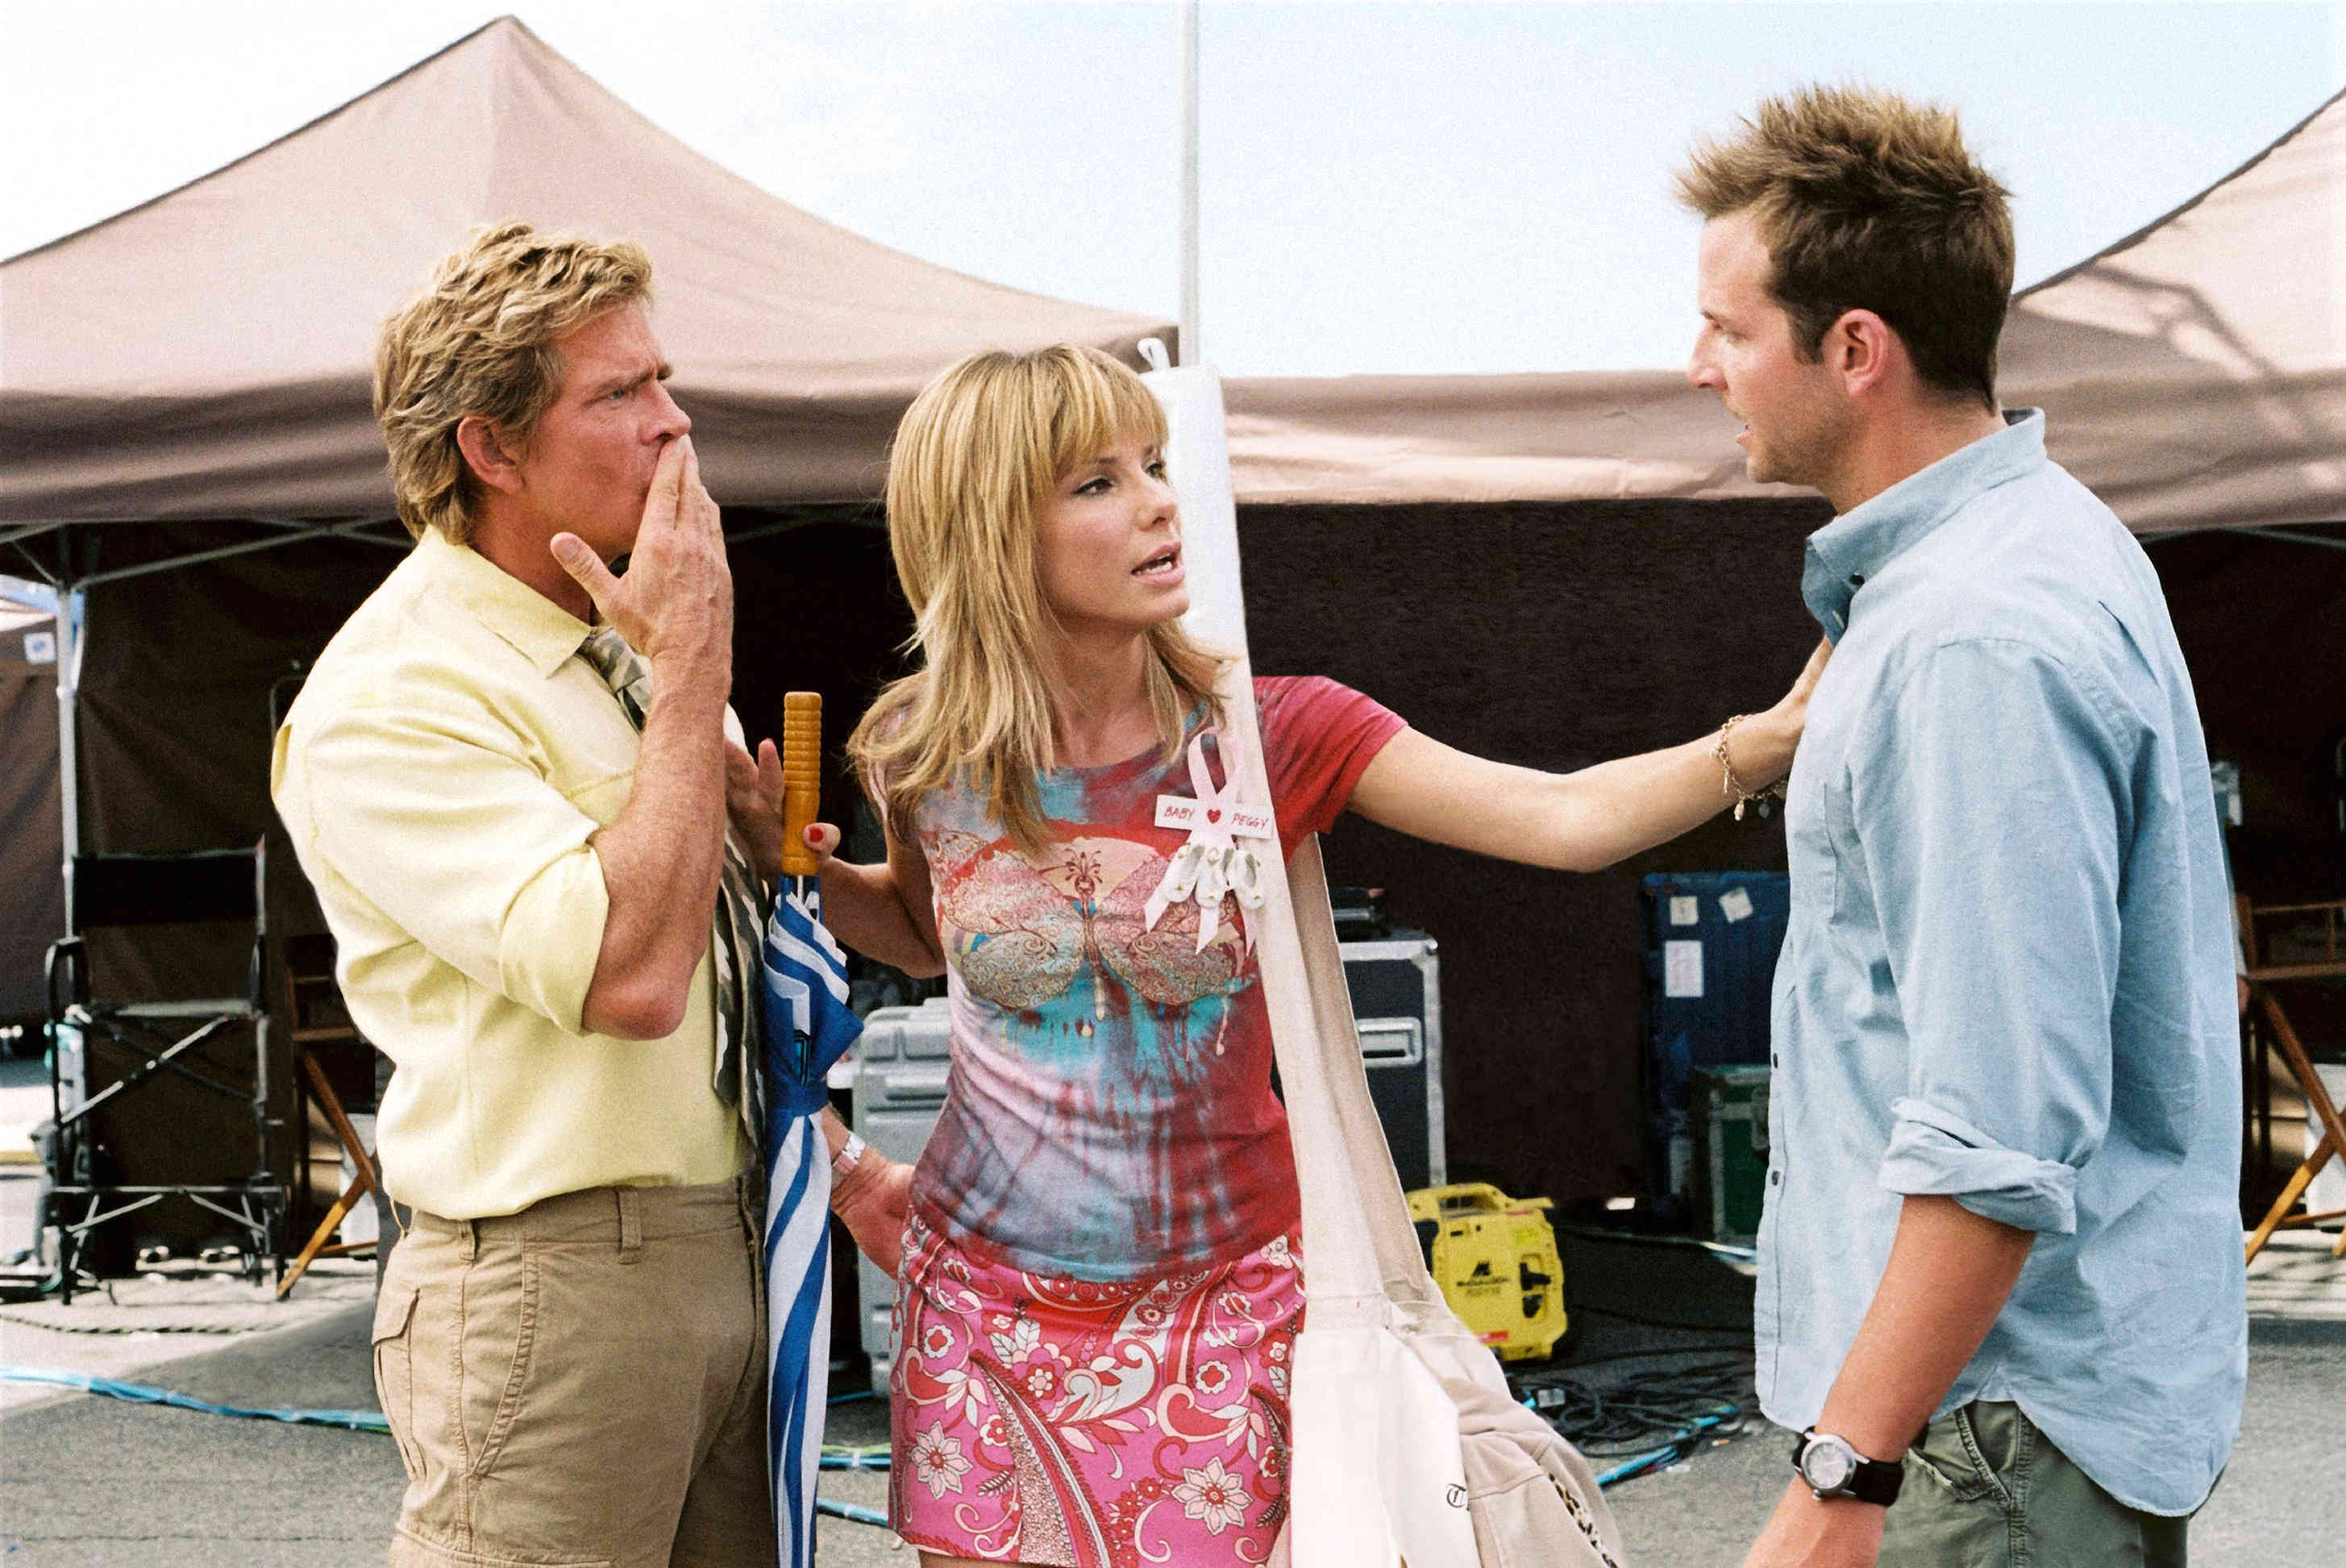 Thomas Haden Church, Sandra Bullock and Bradley Cooper in 20th Century Fox's All About Steve (2009). Photo credit by Suzanne Tenner.